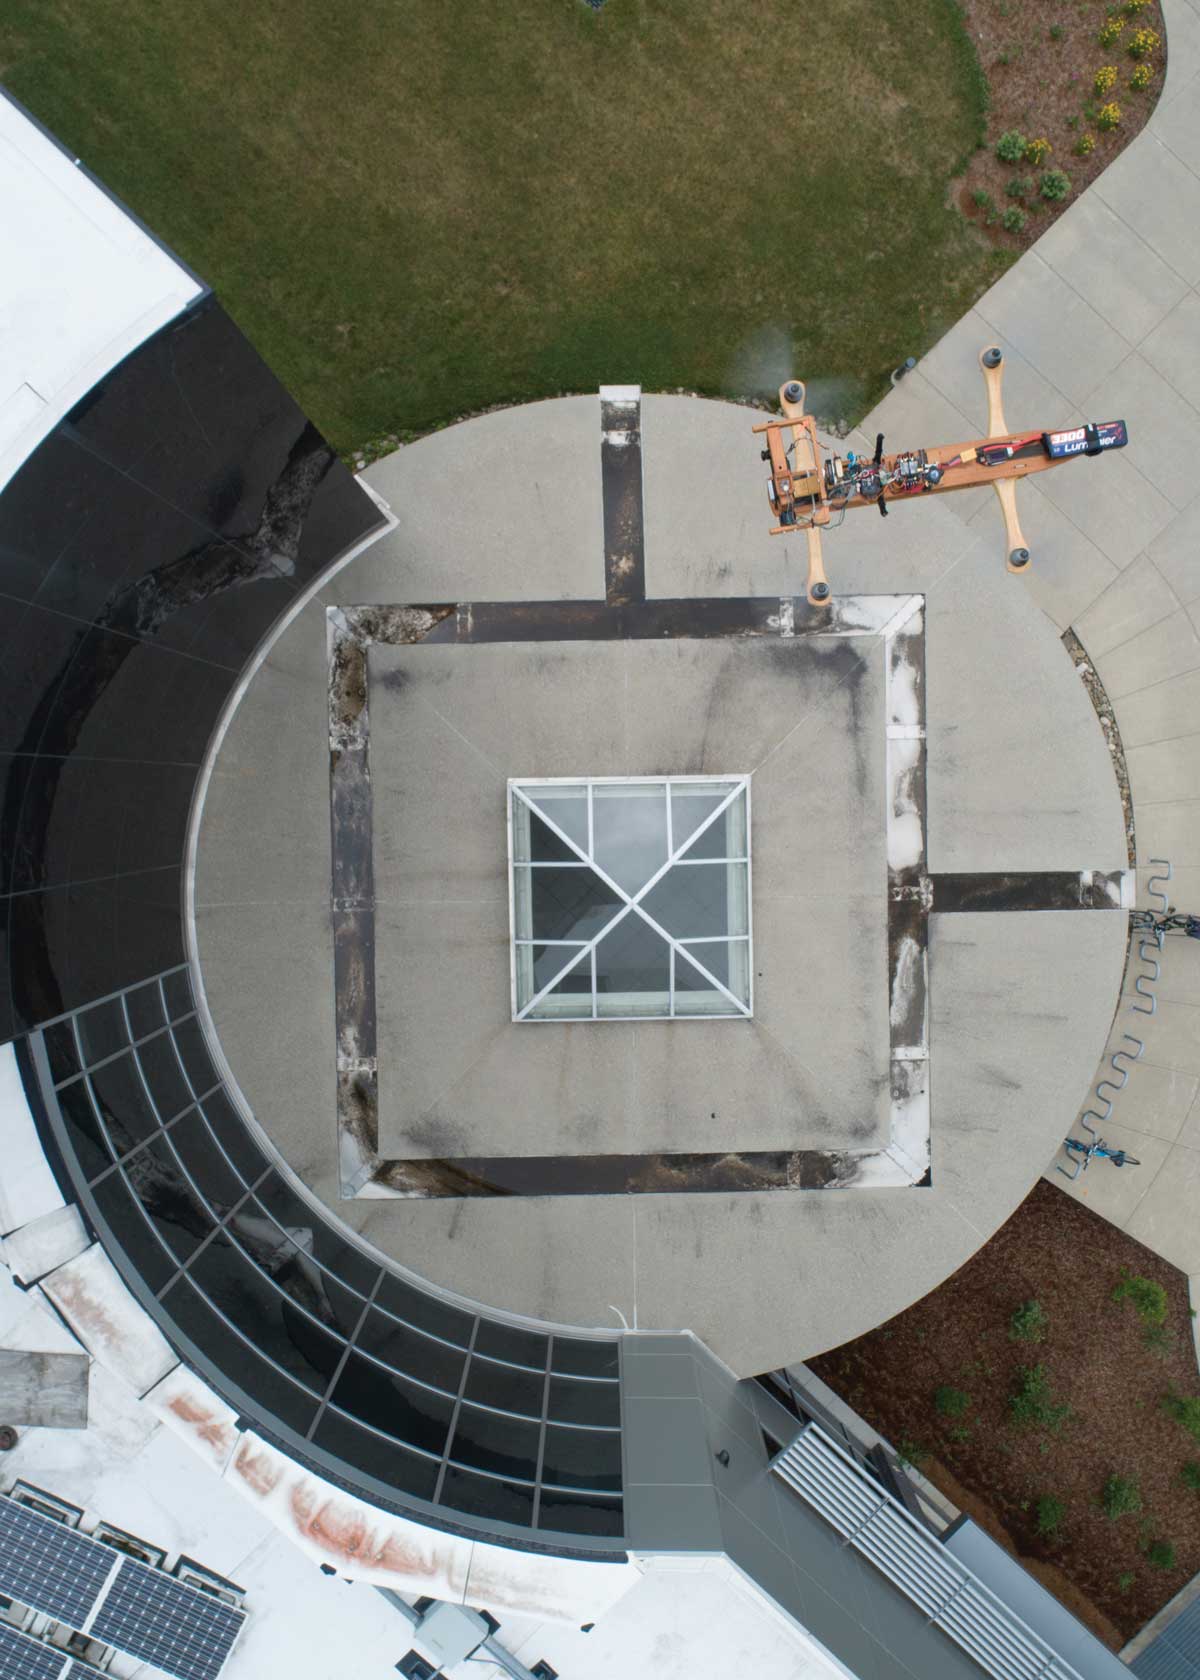 A drone flies above the rotunda at the entrance to the Engineering and Science Building.